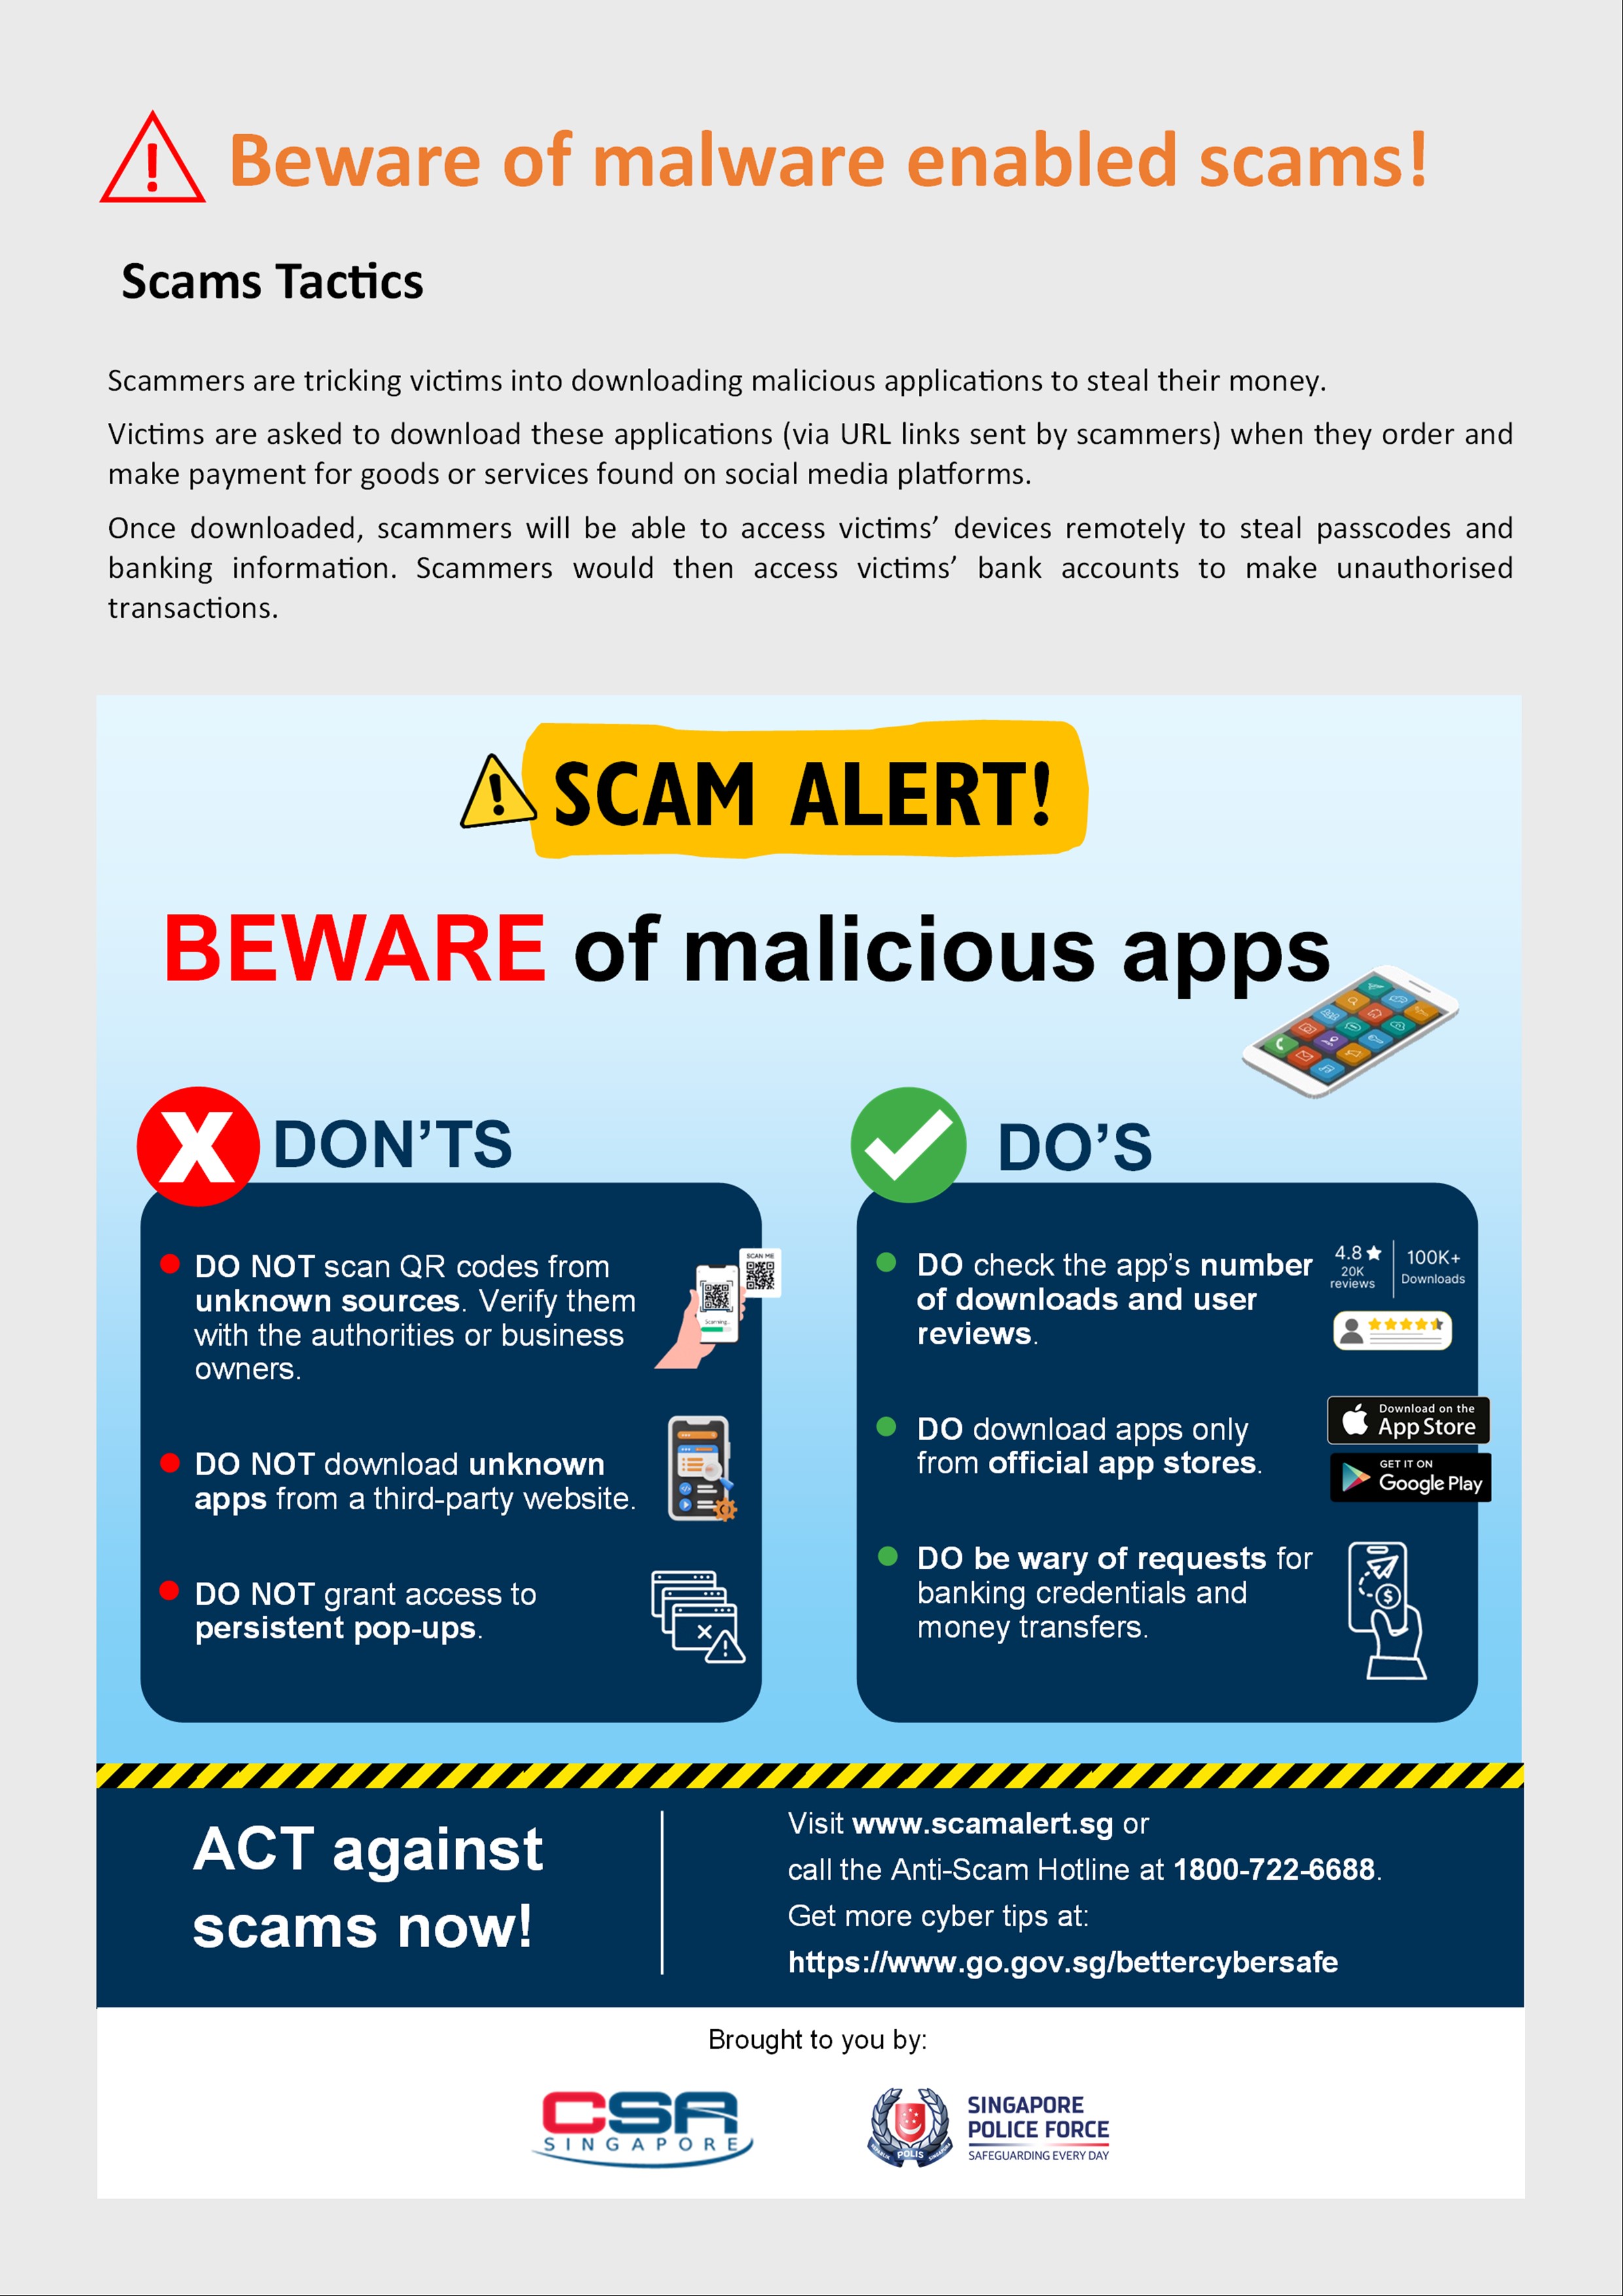 Weekly Bulletin Issue 15 - Scam Tactics